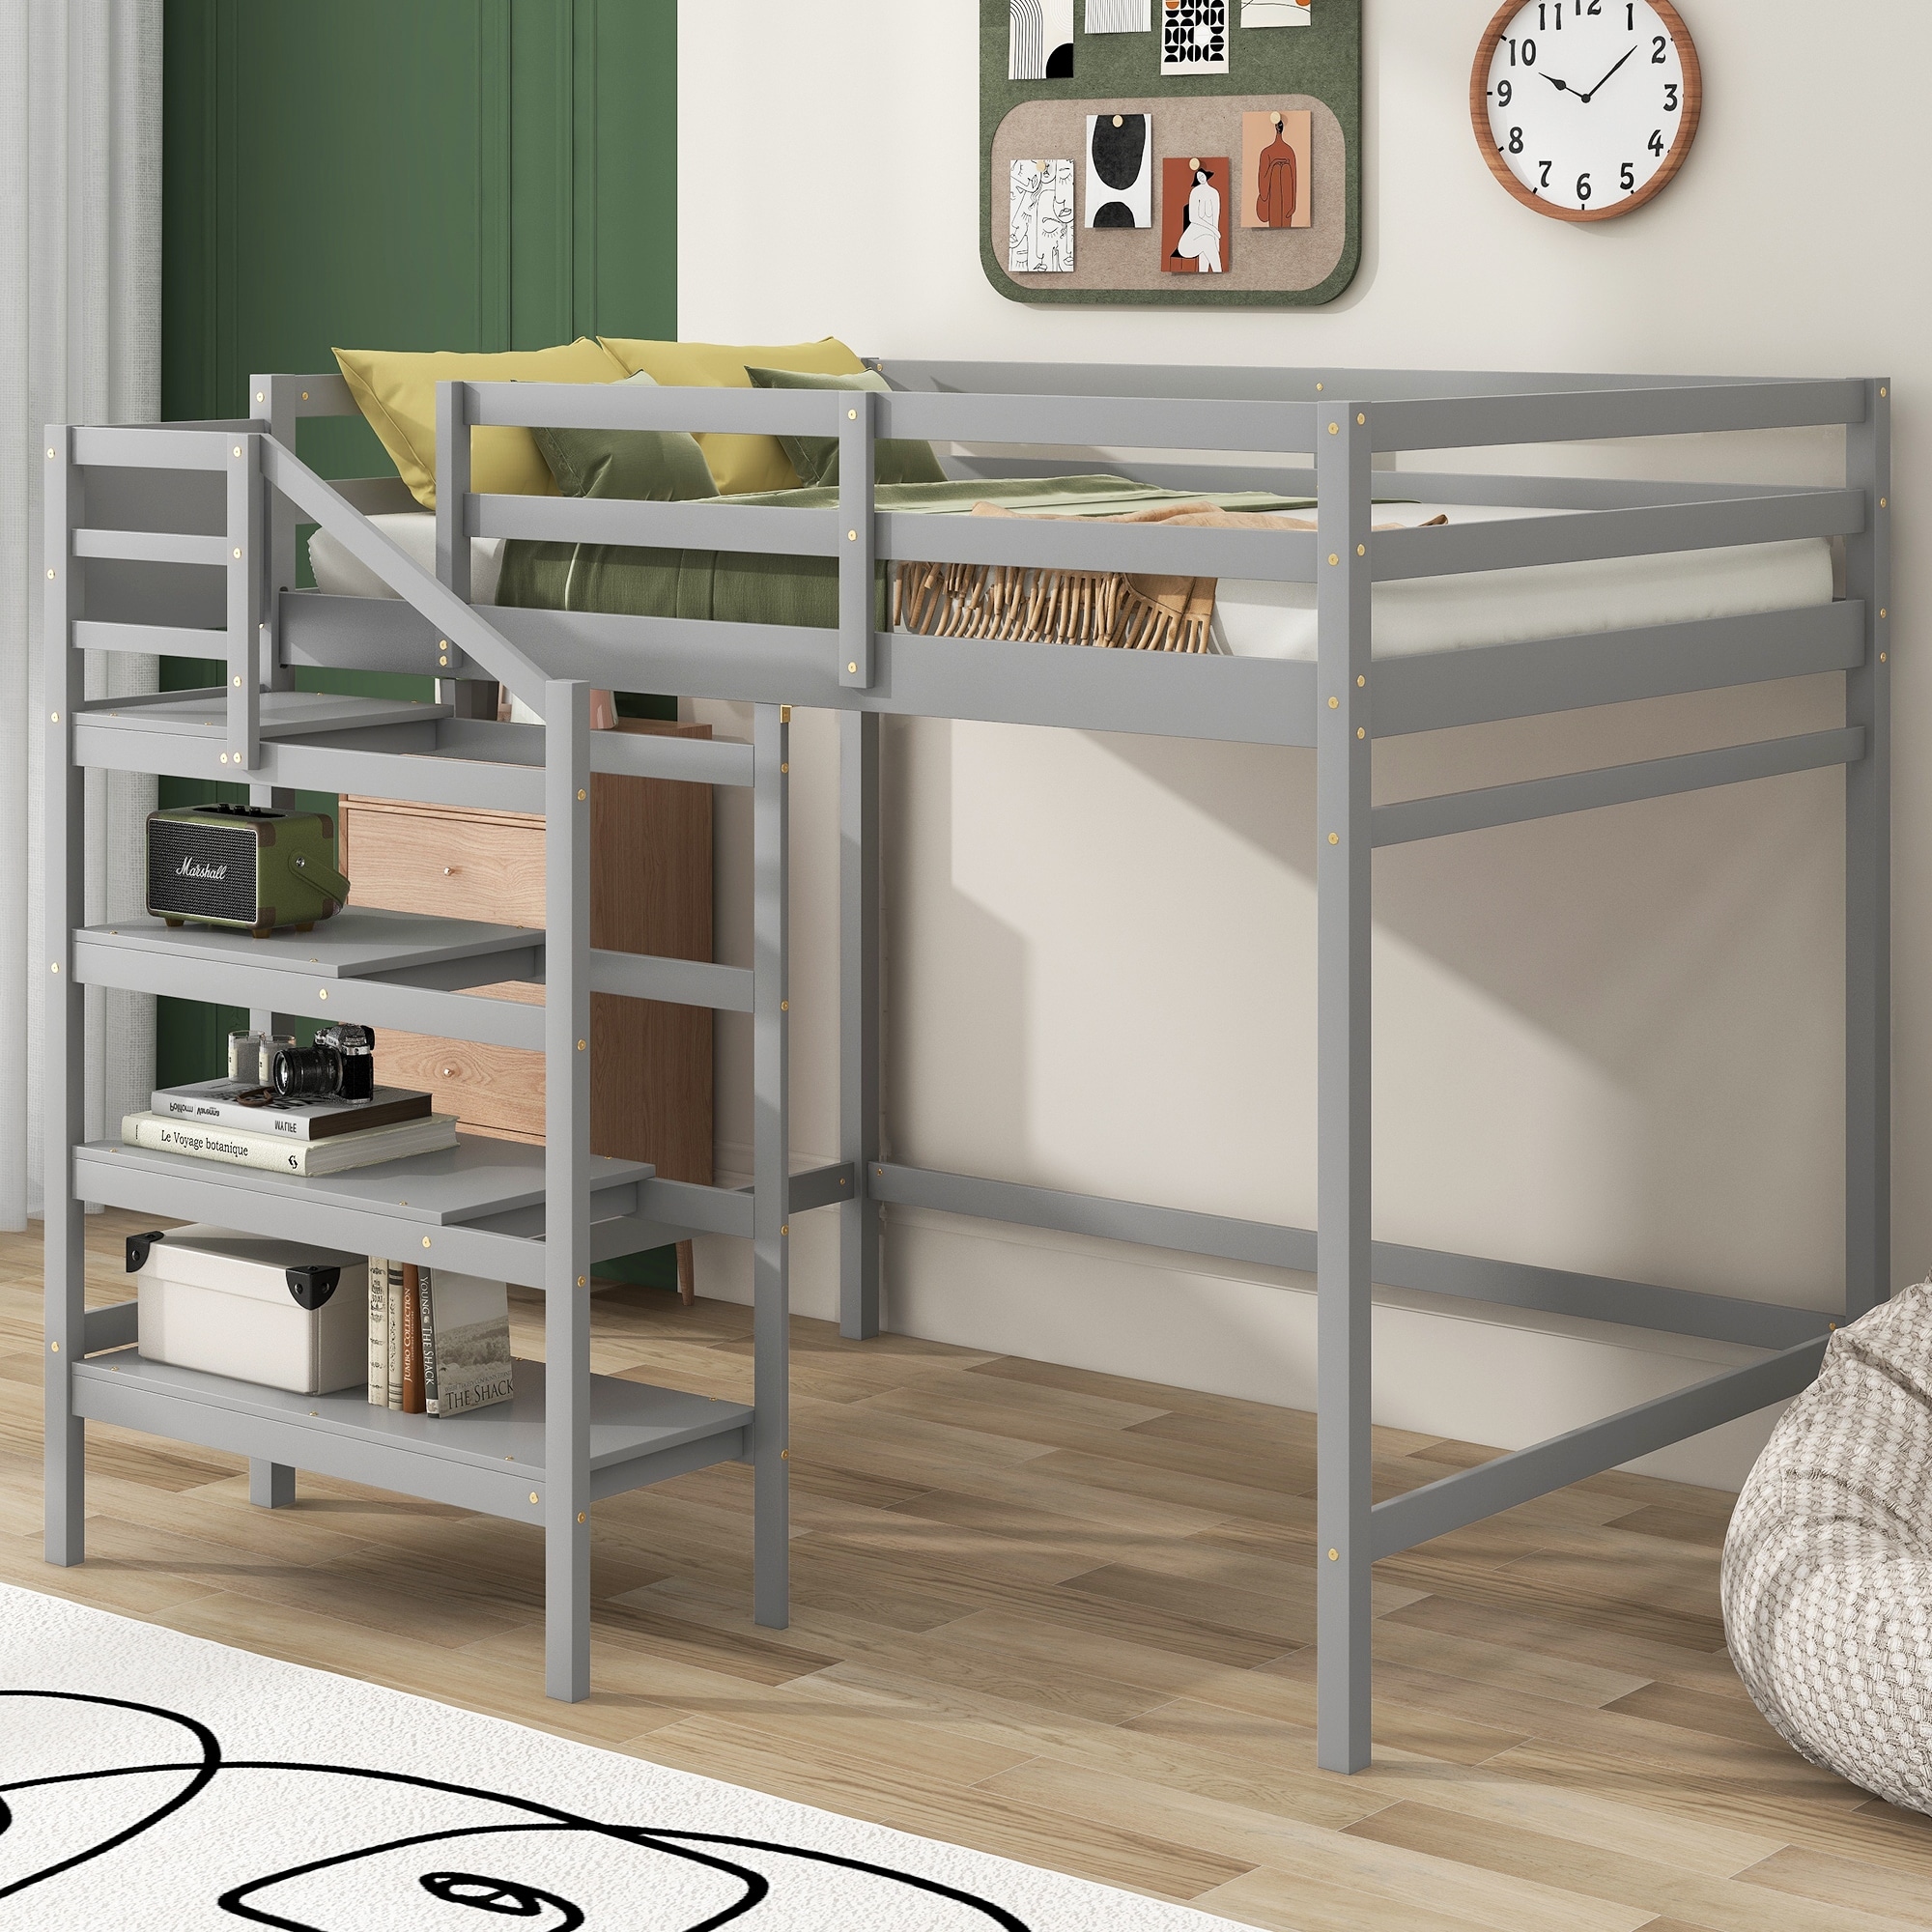 https://ak1.ostkcdn.com/images/products/is/images/direct/ca42511dd1292173c2f67fdee2931297dac30fd0/Gray-Full-Loft-Bed-with-Built-in-Storage-Staircase-and-Hanger-for-Clothes-Kids-Boys-%26-Girls%2C-Wood-Bedframe%2C-No-Need-Spring-Box.jpg